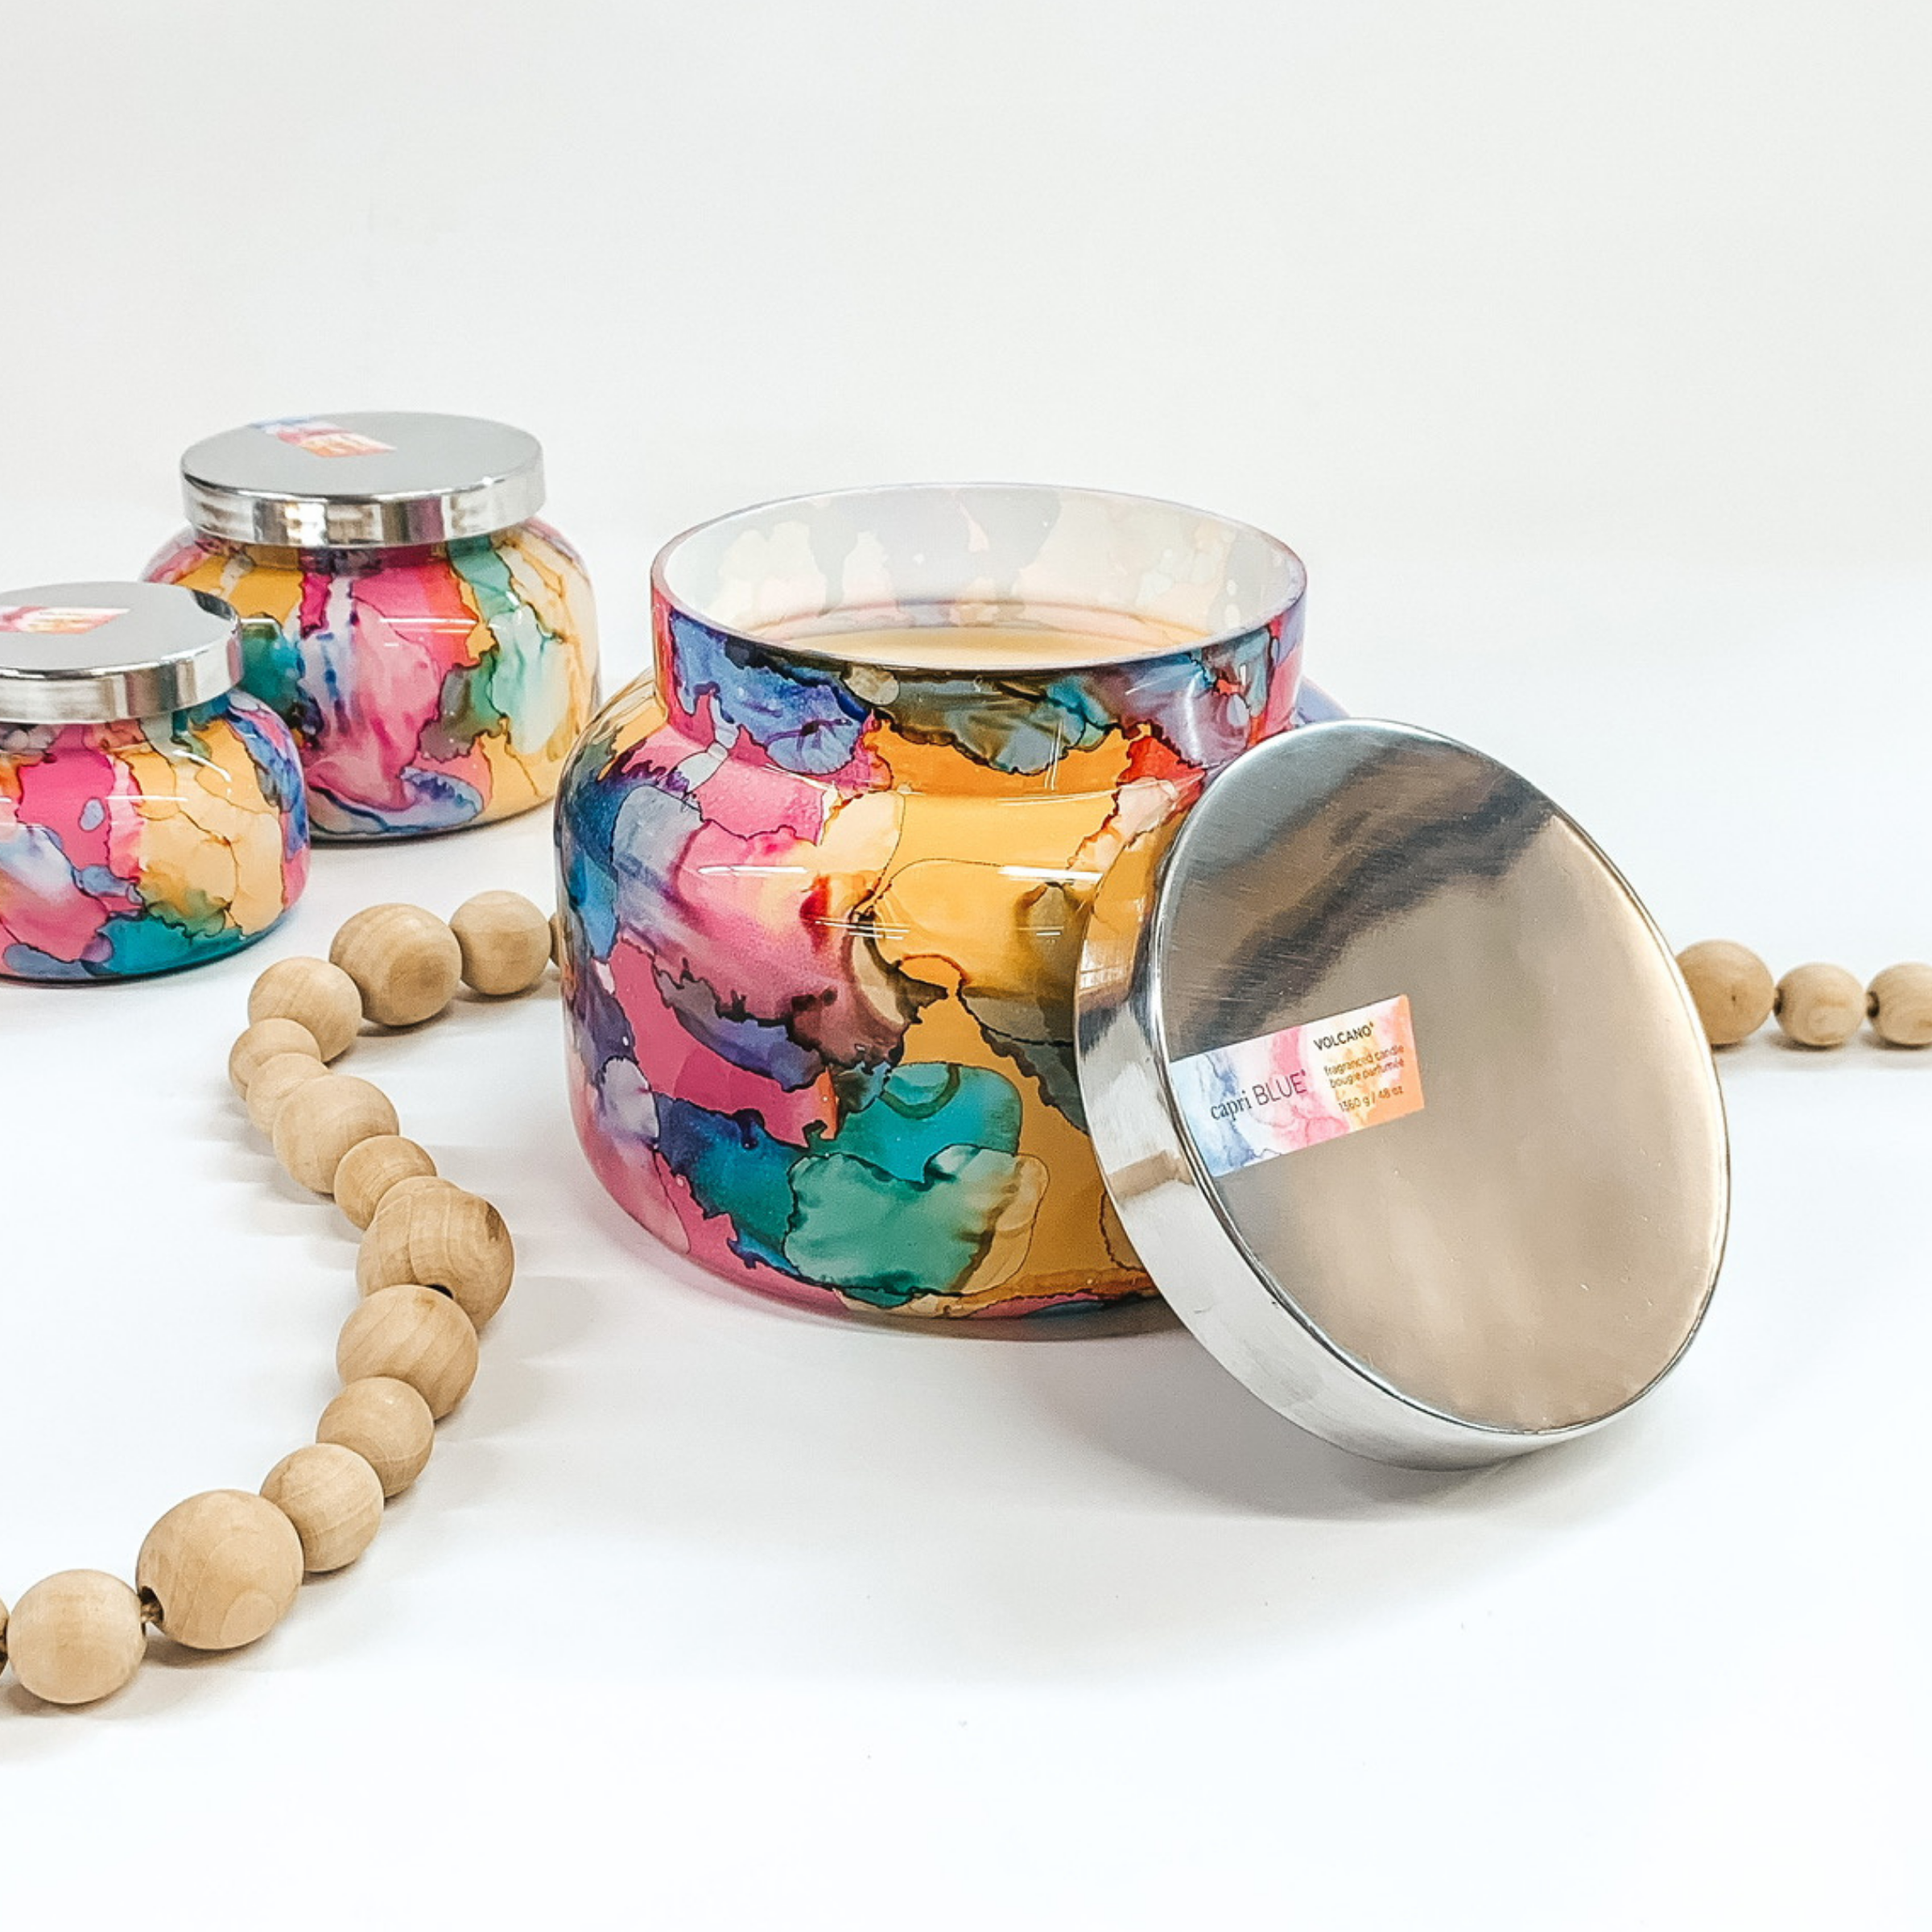 A rainbow watercolor glass jar candle with a metal lid. Pictured on white background with wooden beads and smaller candles.